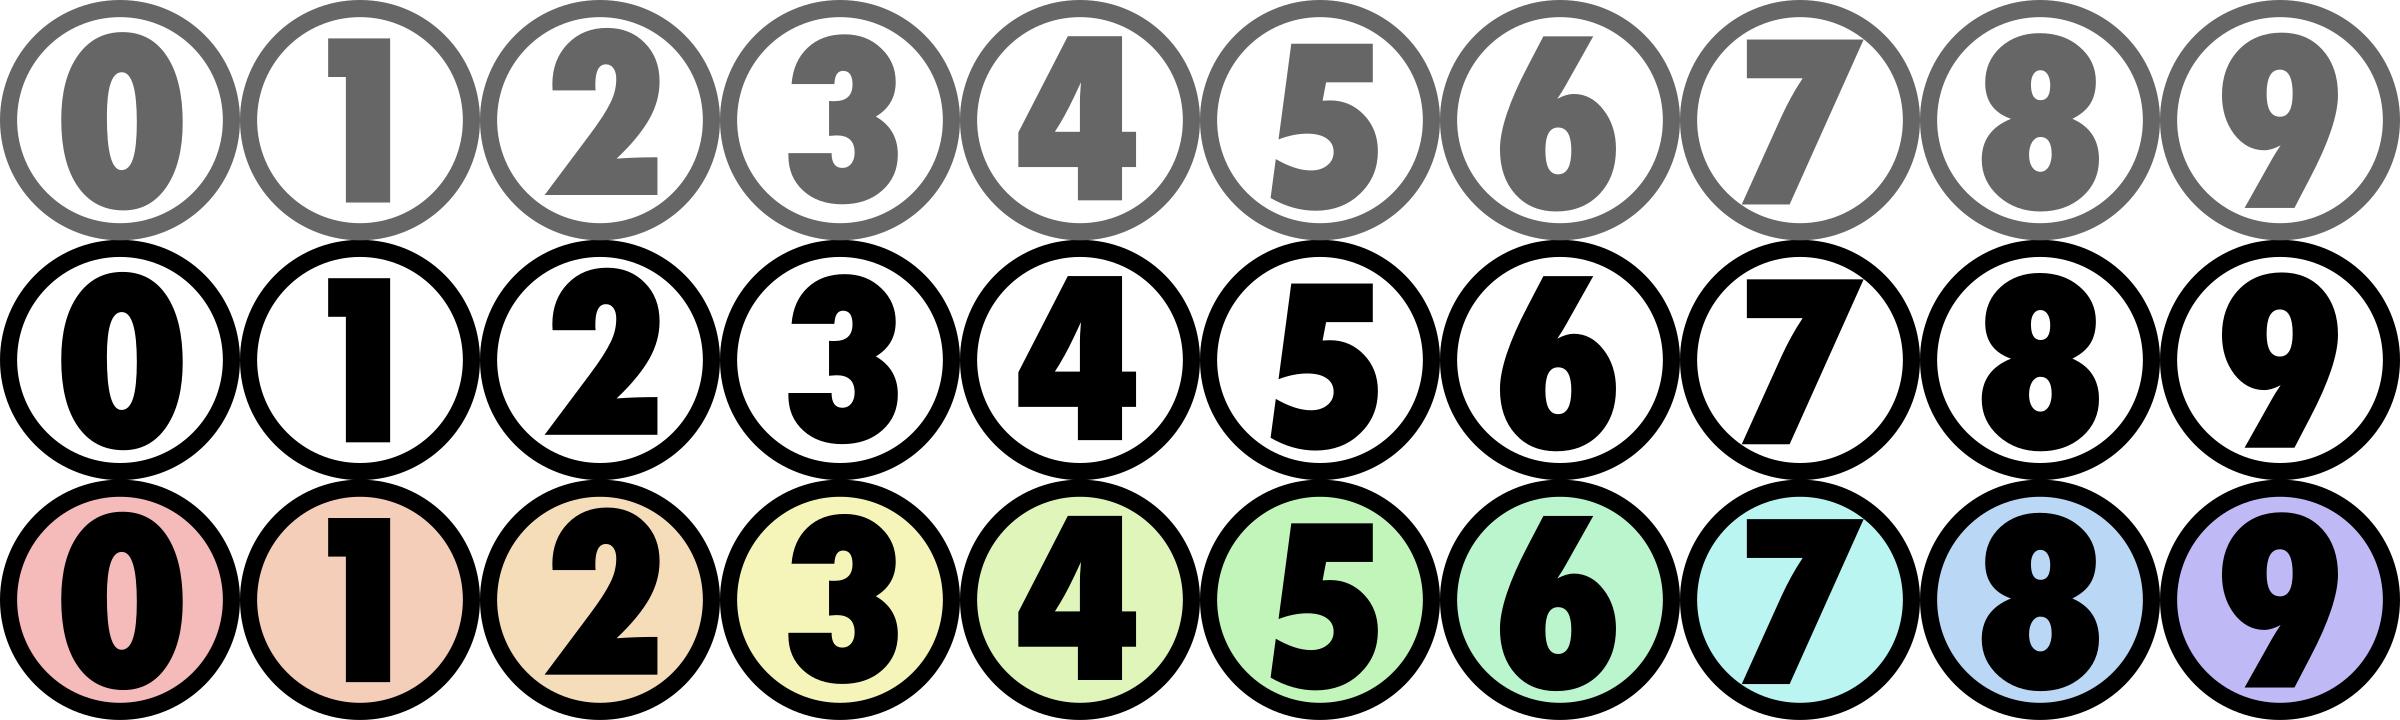 Number icons for CSS slicing PNG icons